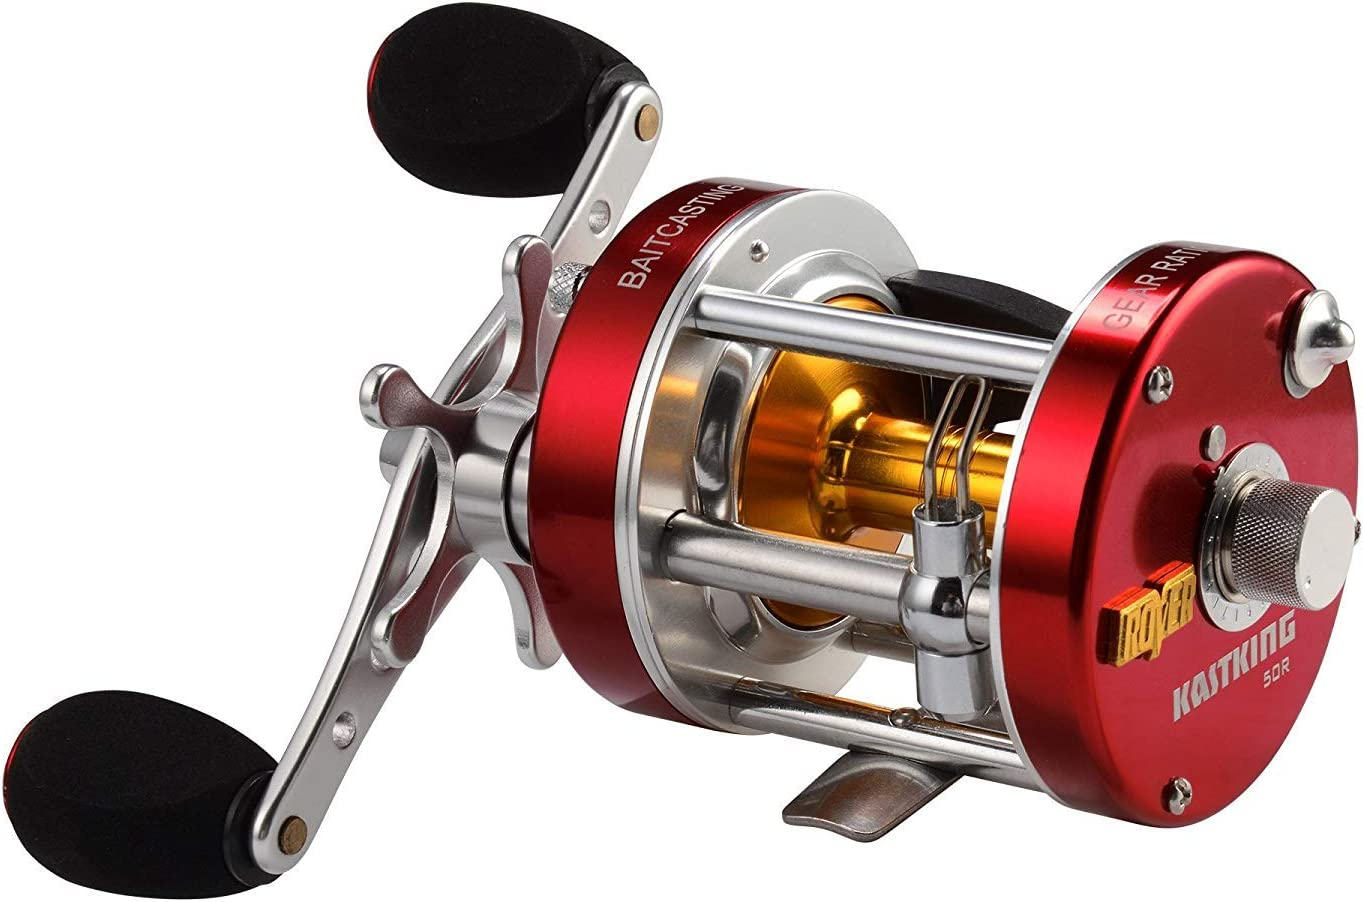 3. KastKing Rover Round Reel - Best Small Baitcaster For Conventional Fishing